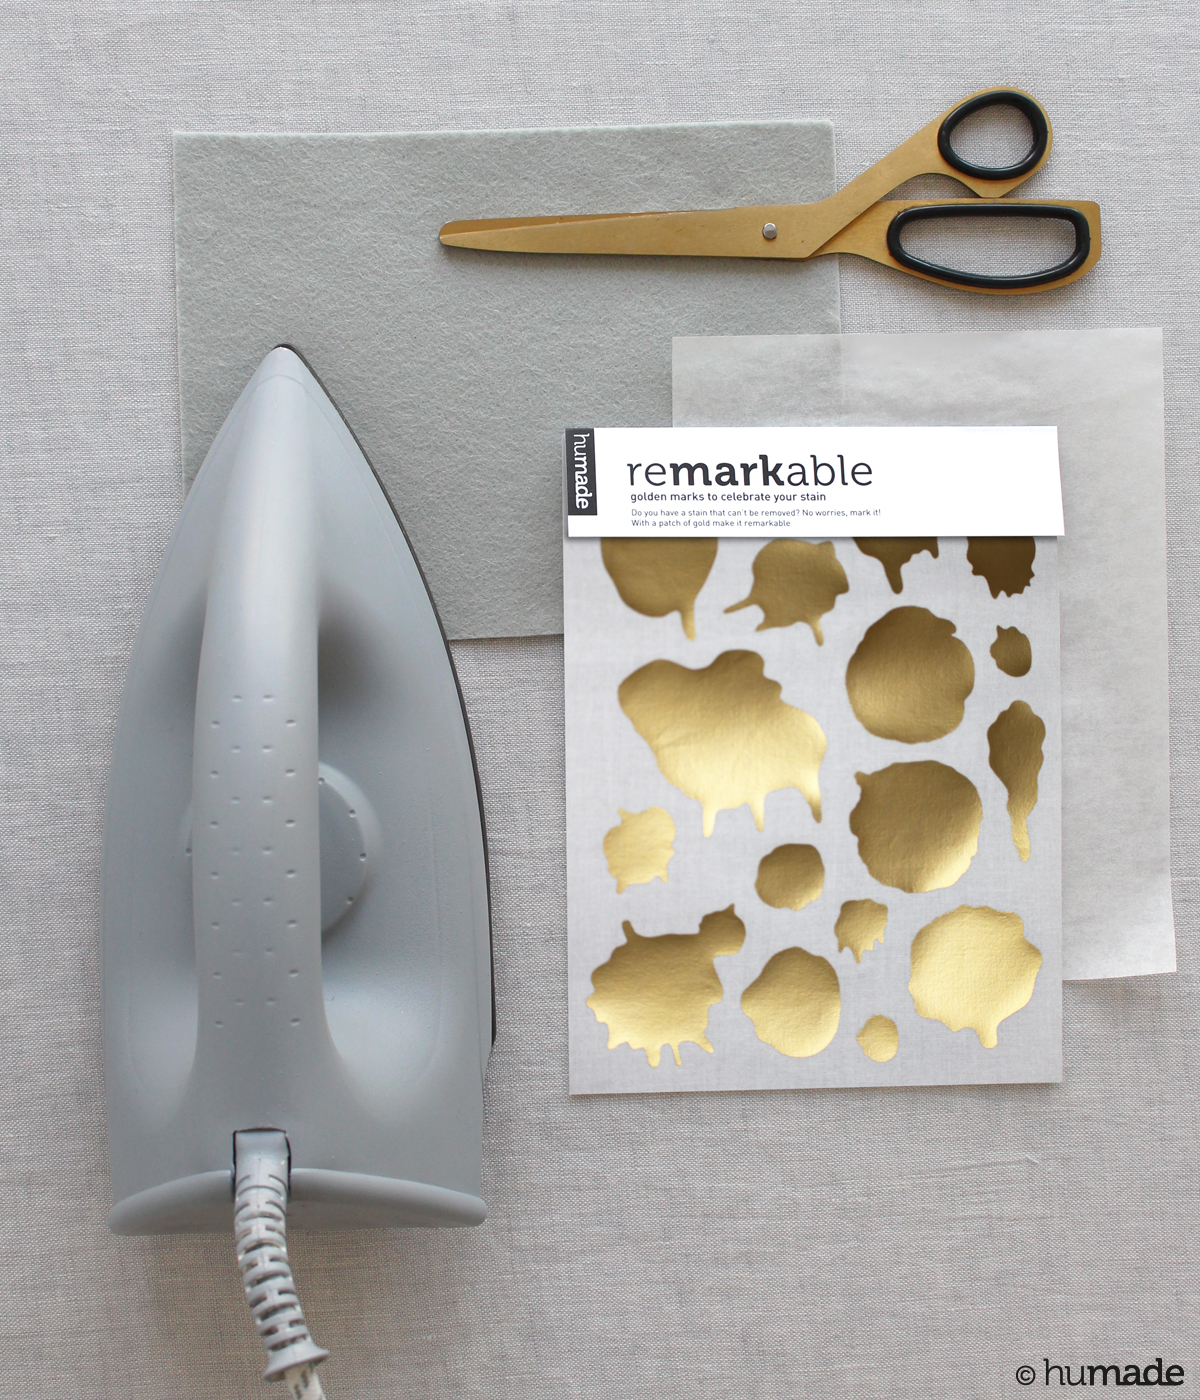 reMARKable / textile - Do you have a stain that can not be removed? No worries, mark it!
reMARKable is a new solution for y...